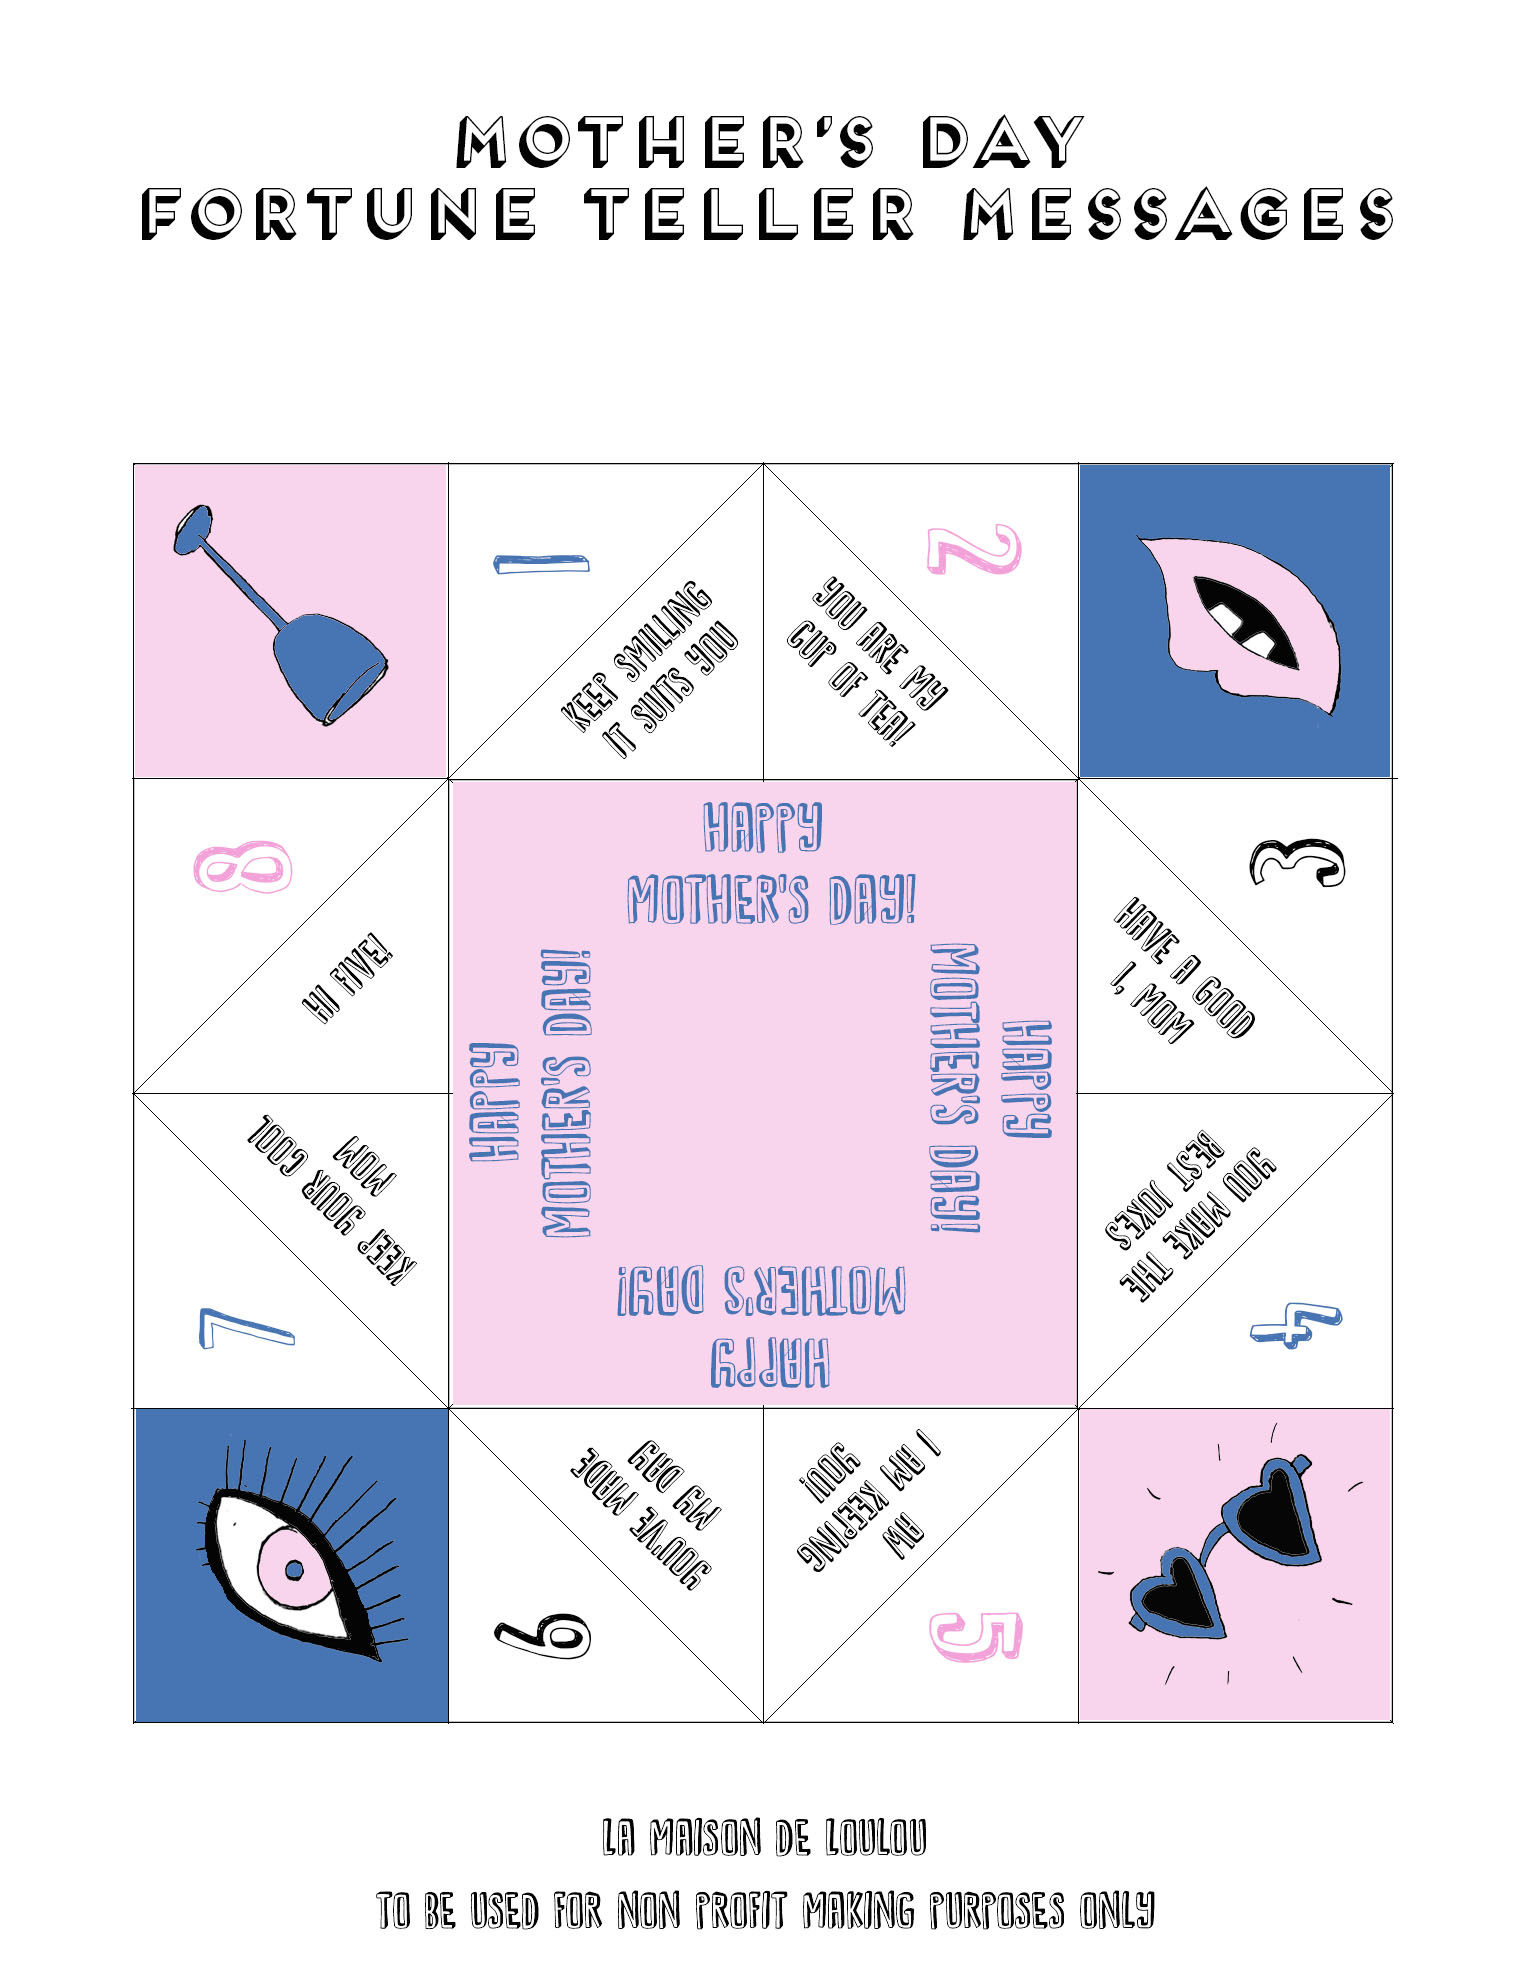 DIY mothers day fortune teller